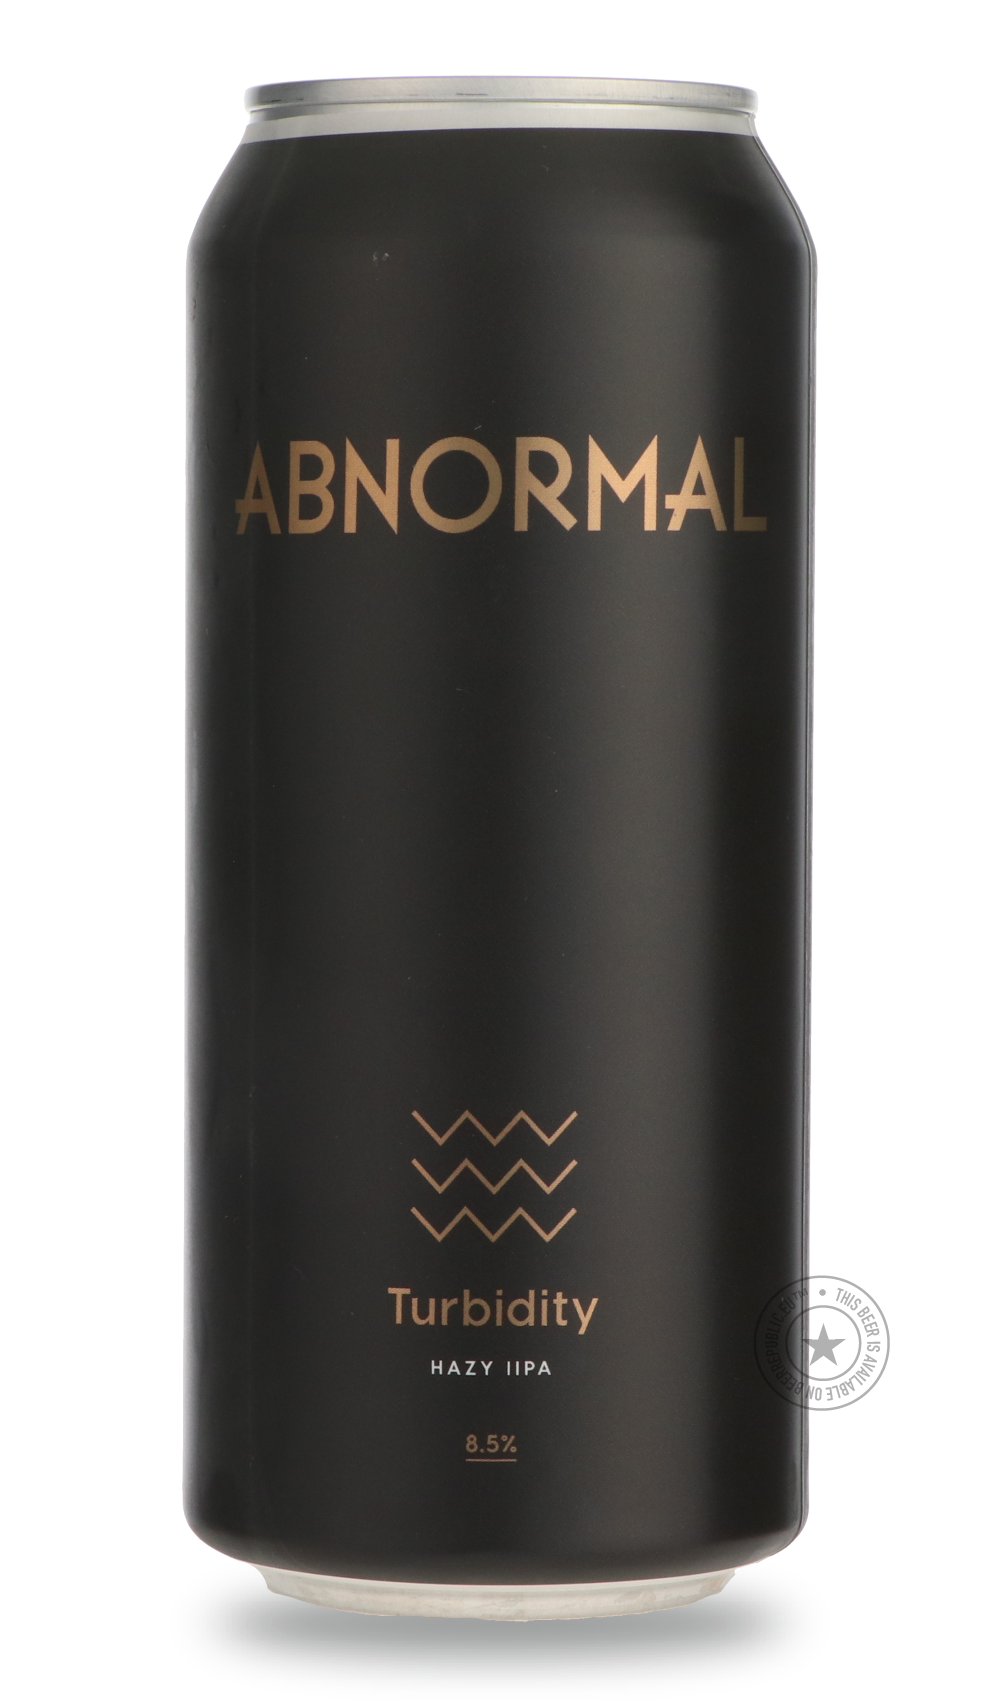 -Abnormal- Turbidity-IPA- Only @ Beer Republic - The best online beer store for American & Canadian craft beer - Buy beer online from the USA and Canada - Bier online kopen - Amerikaans bier kopen - Craft beer store - Craft beer kopen - Amerikanisch bier kaufen - Bier online kaufen - Acheter biere online - IPA - Stout - Porter - New England IPA - Hazy IPA - Imperial Stout - Barrel Aged - Barrel Aged Imperial Stout - Brown - Dark beer - Blond - Blonde - Pilsner - Lager - Wheat - Weizen - Amber - Barley Wine 